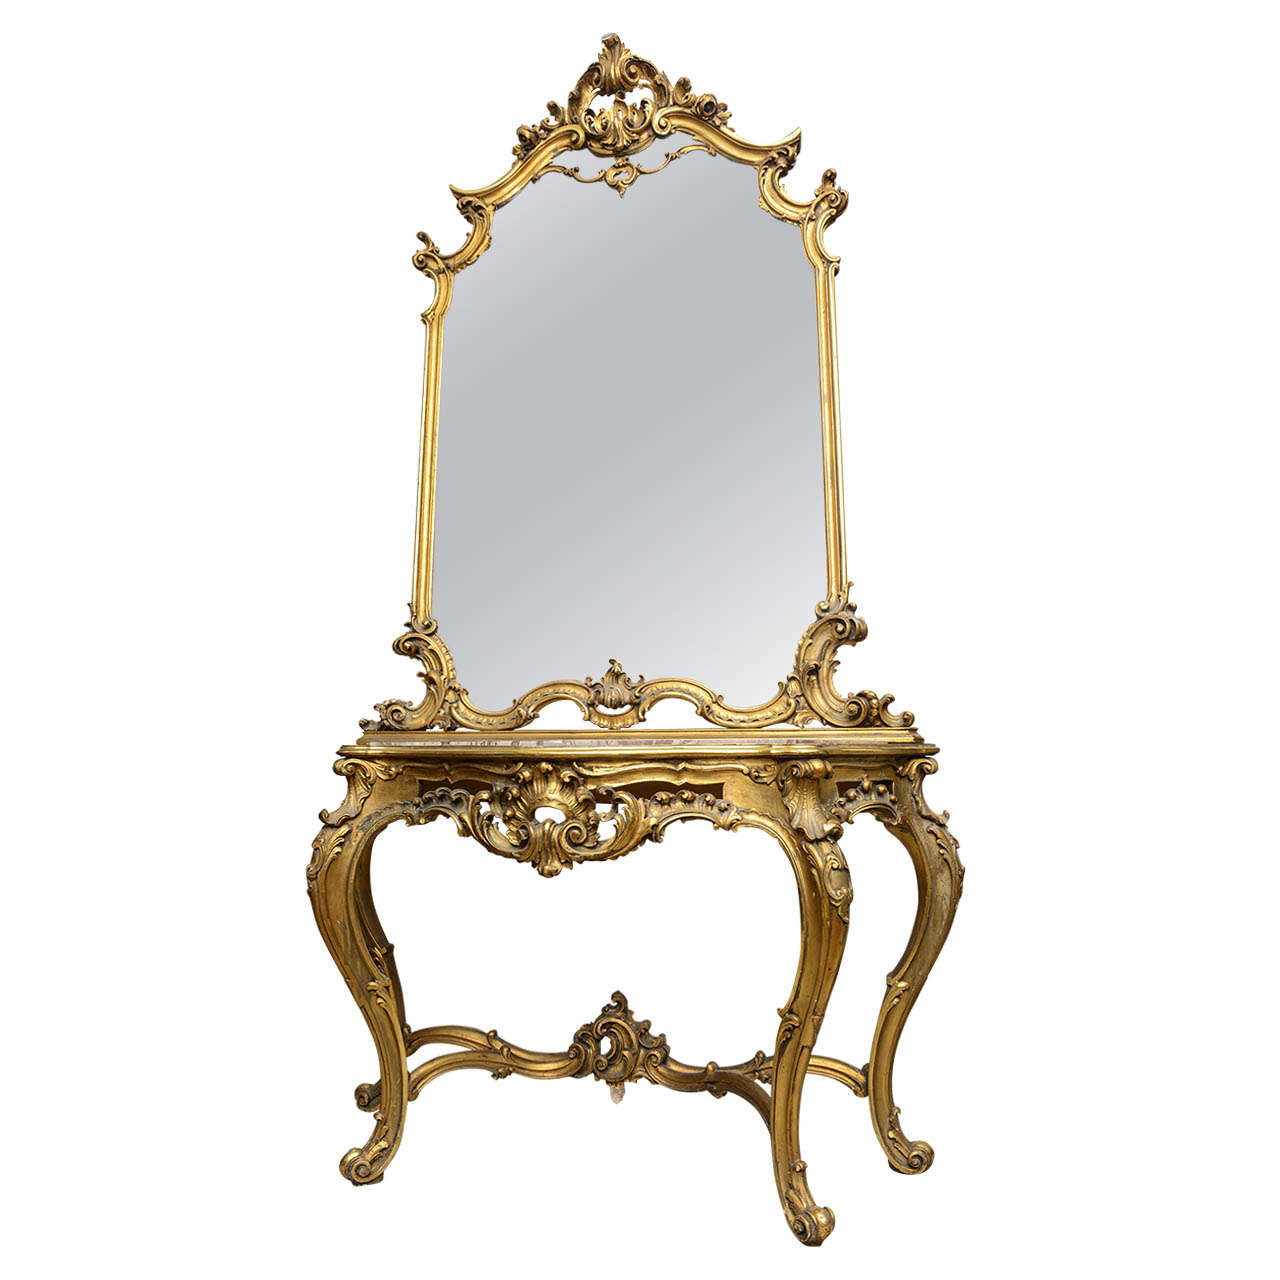 19th c. French Superb Marble-Top, Gilt Console Table with Mirror